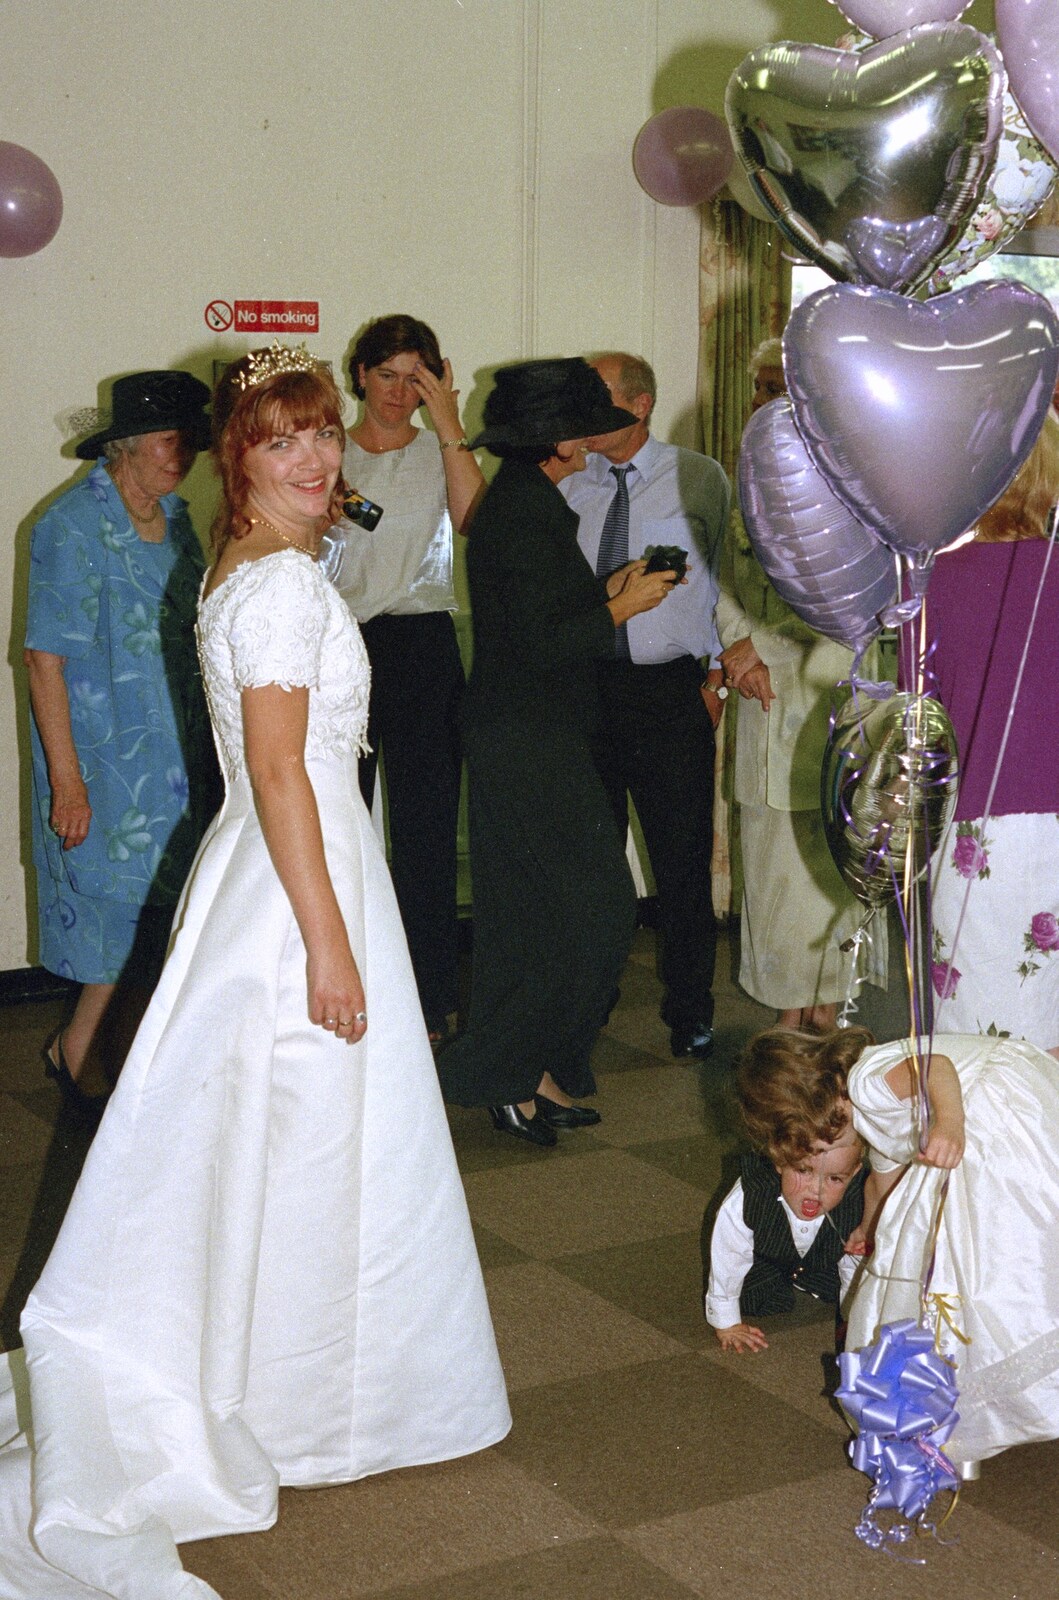 Michelle and a load of balloons from Sean and Michelle's Wedding, Bashley FC, New Milton - 12th August 2000